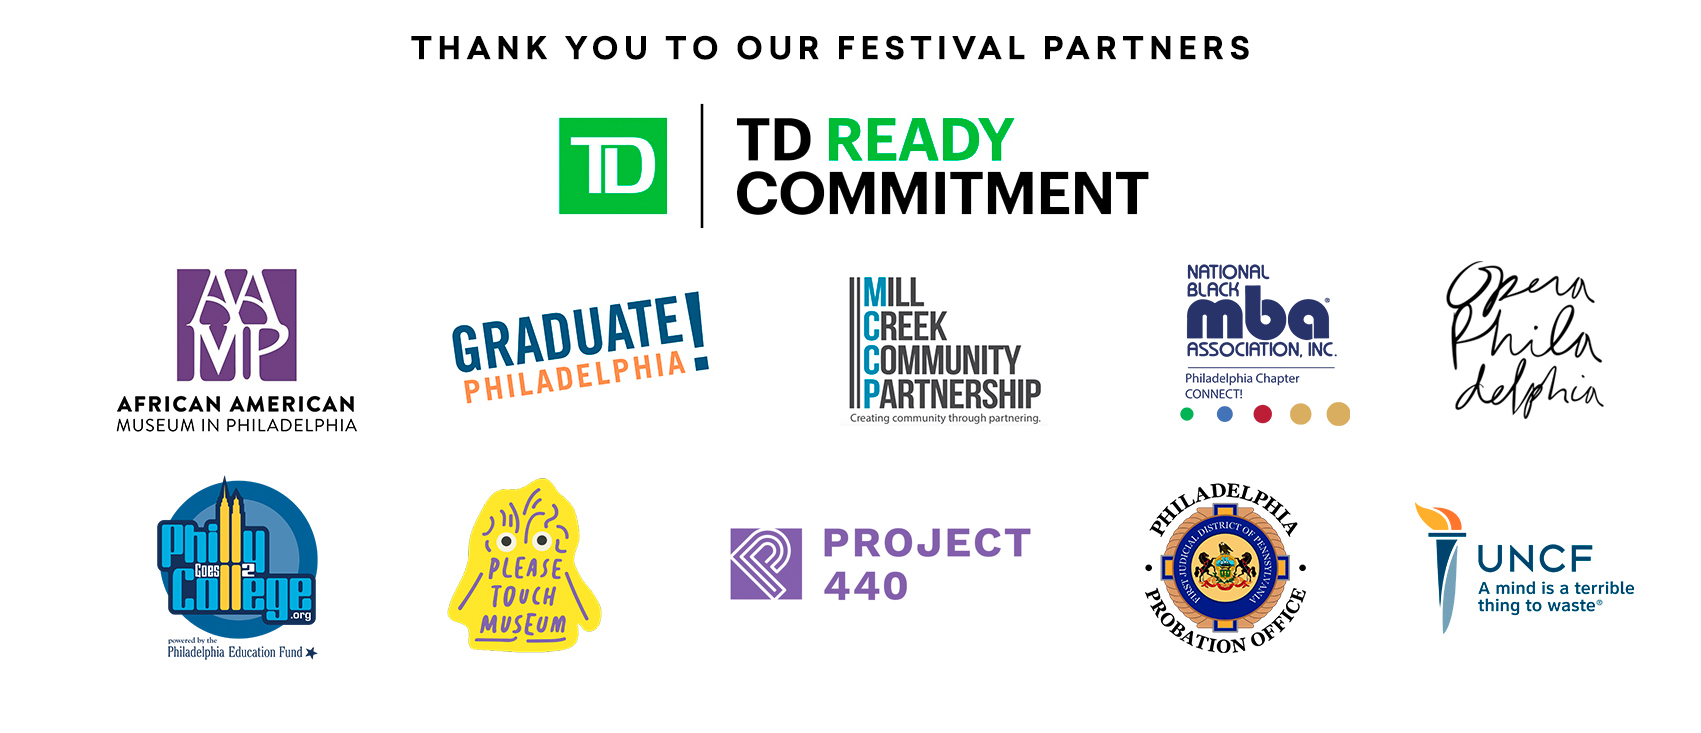 Thank you to our HBCU Festival Partners!